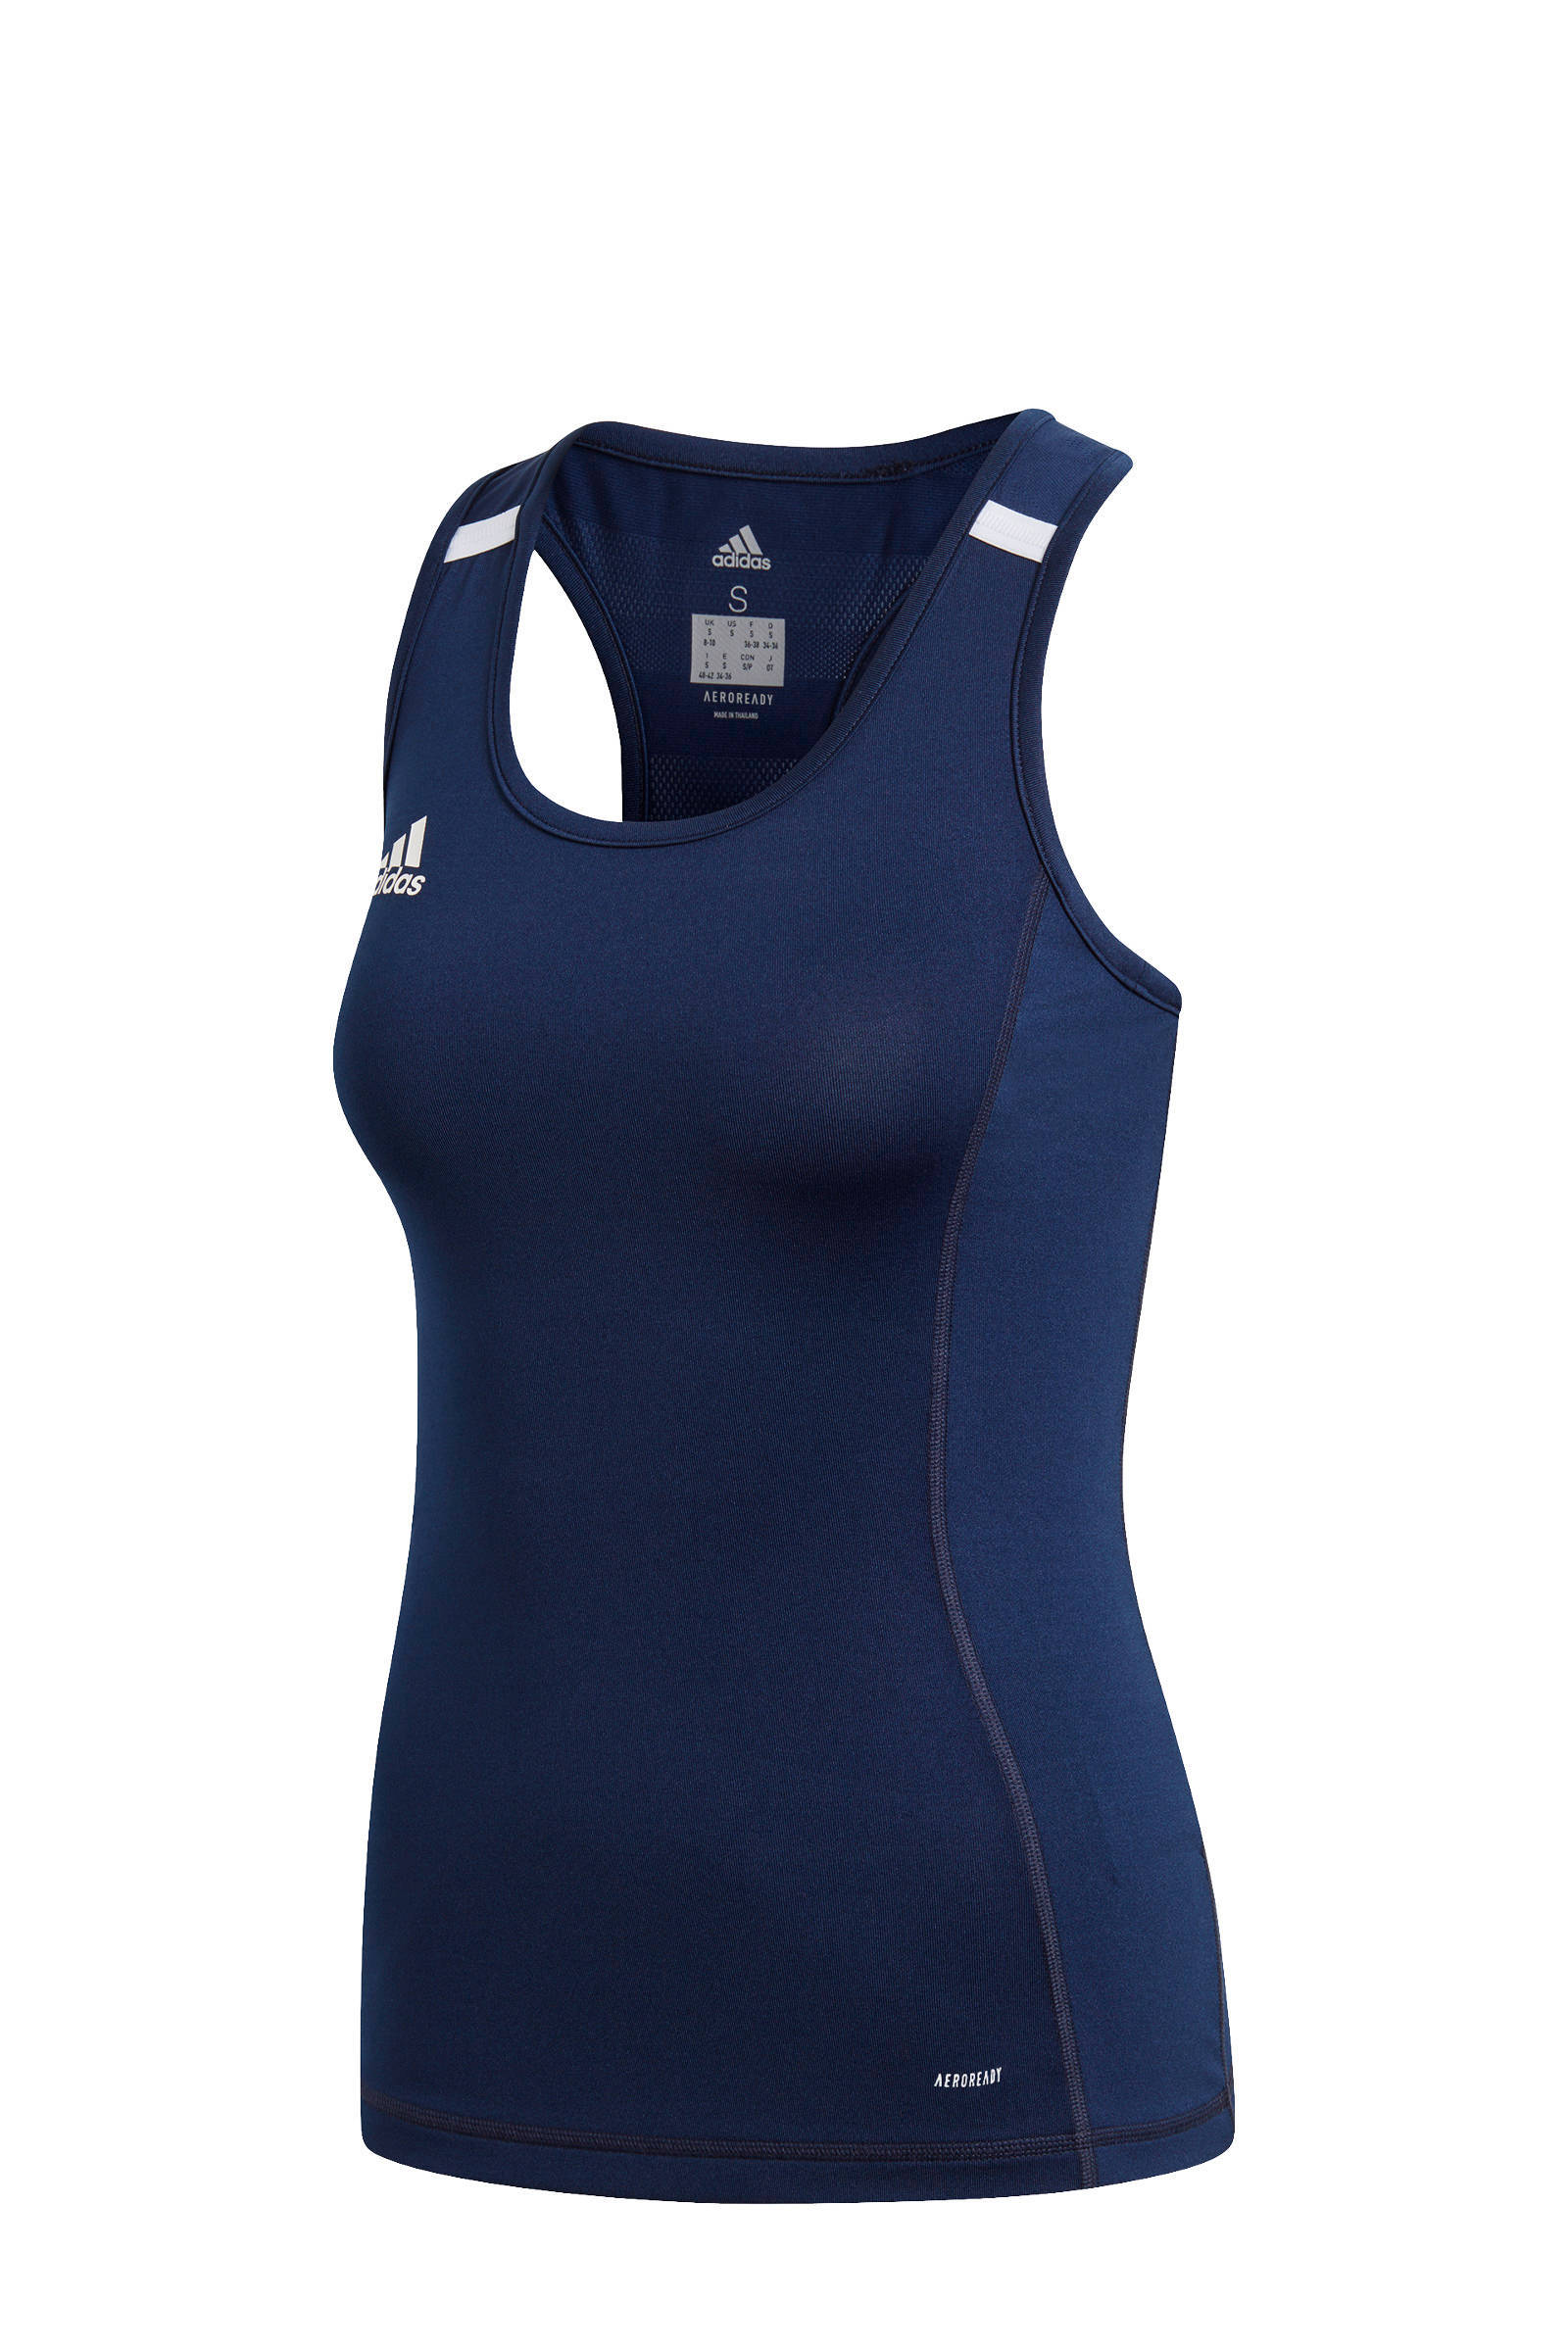 vonnis hel Chip Sporttops Adidas Top Sellers, SAVE 39% - mpgc.net